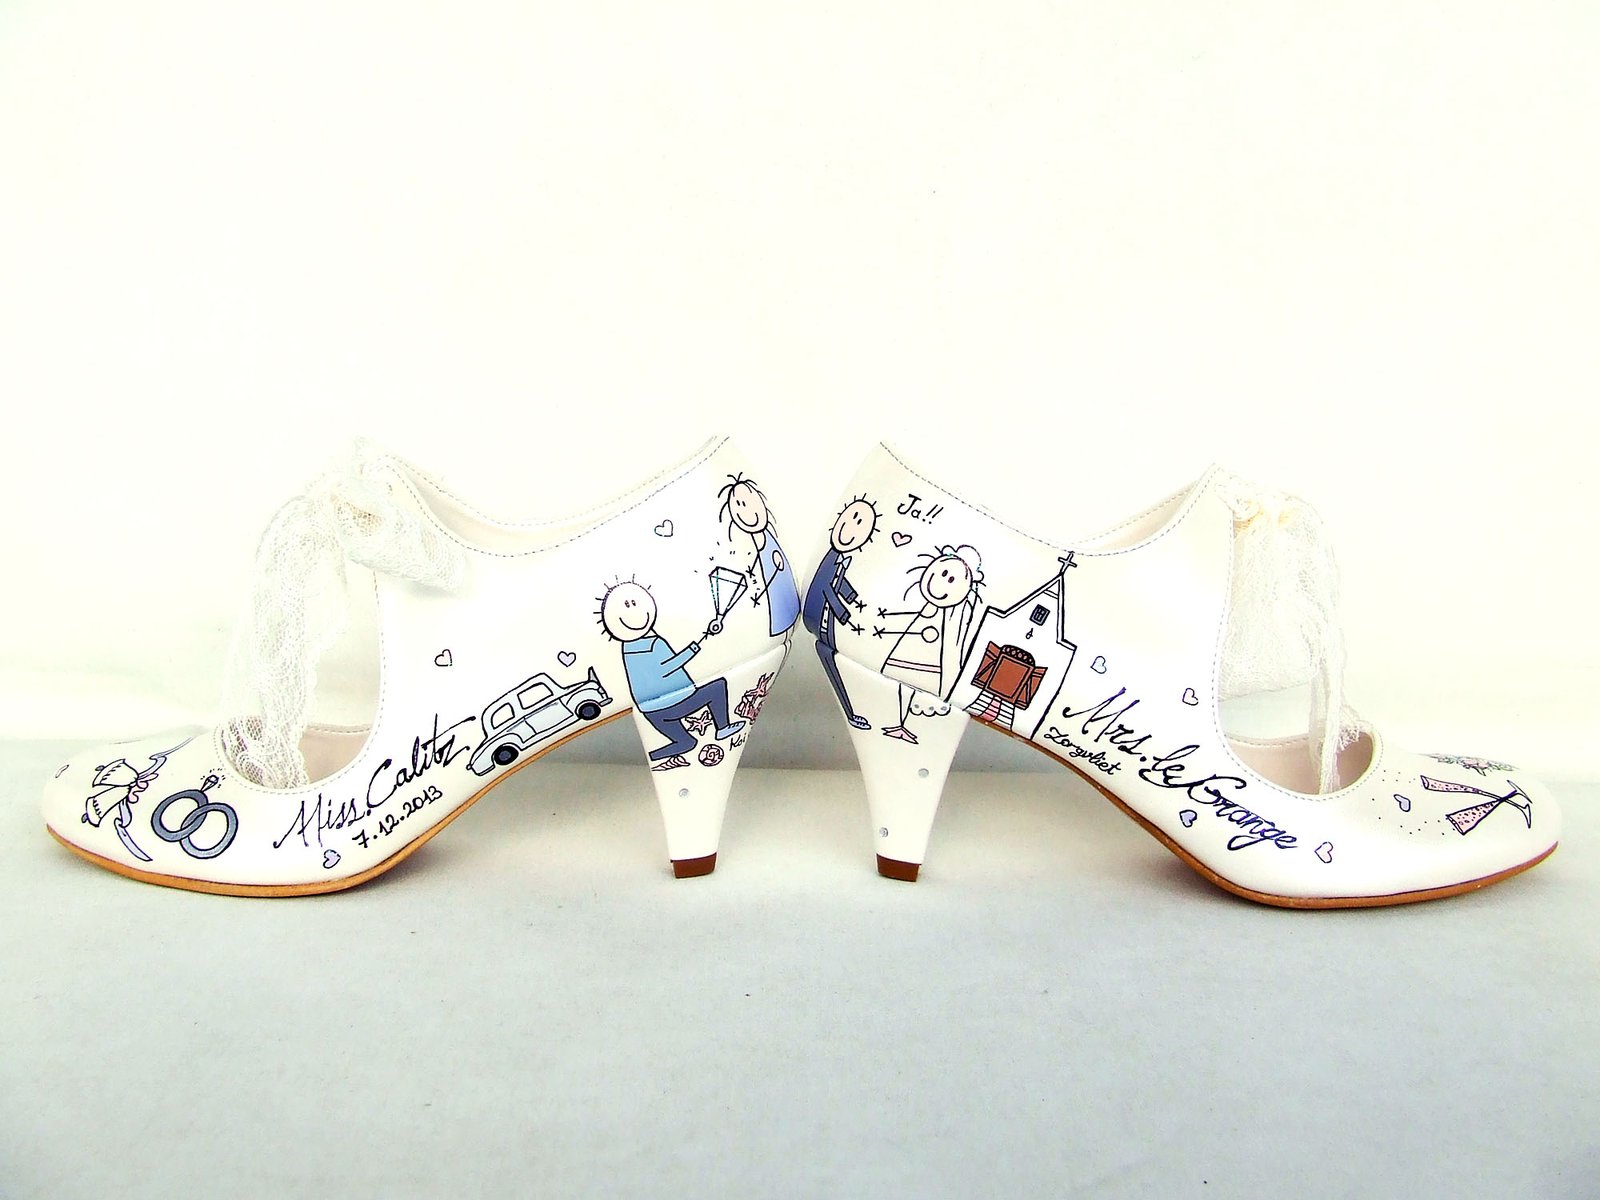 personalized wedding shoes